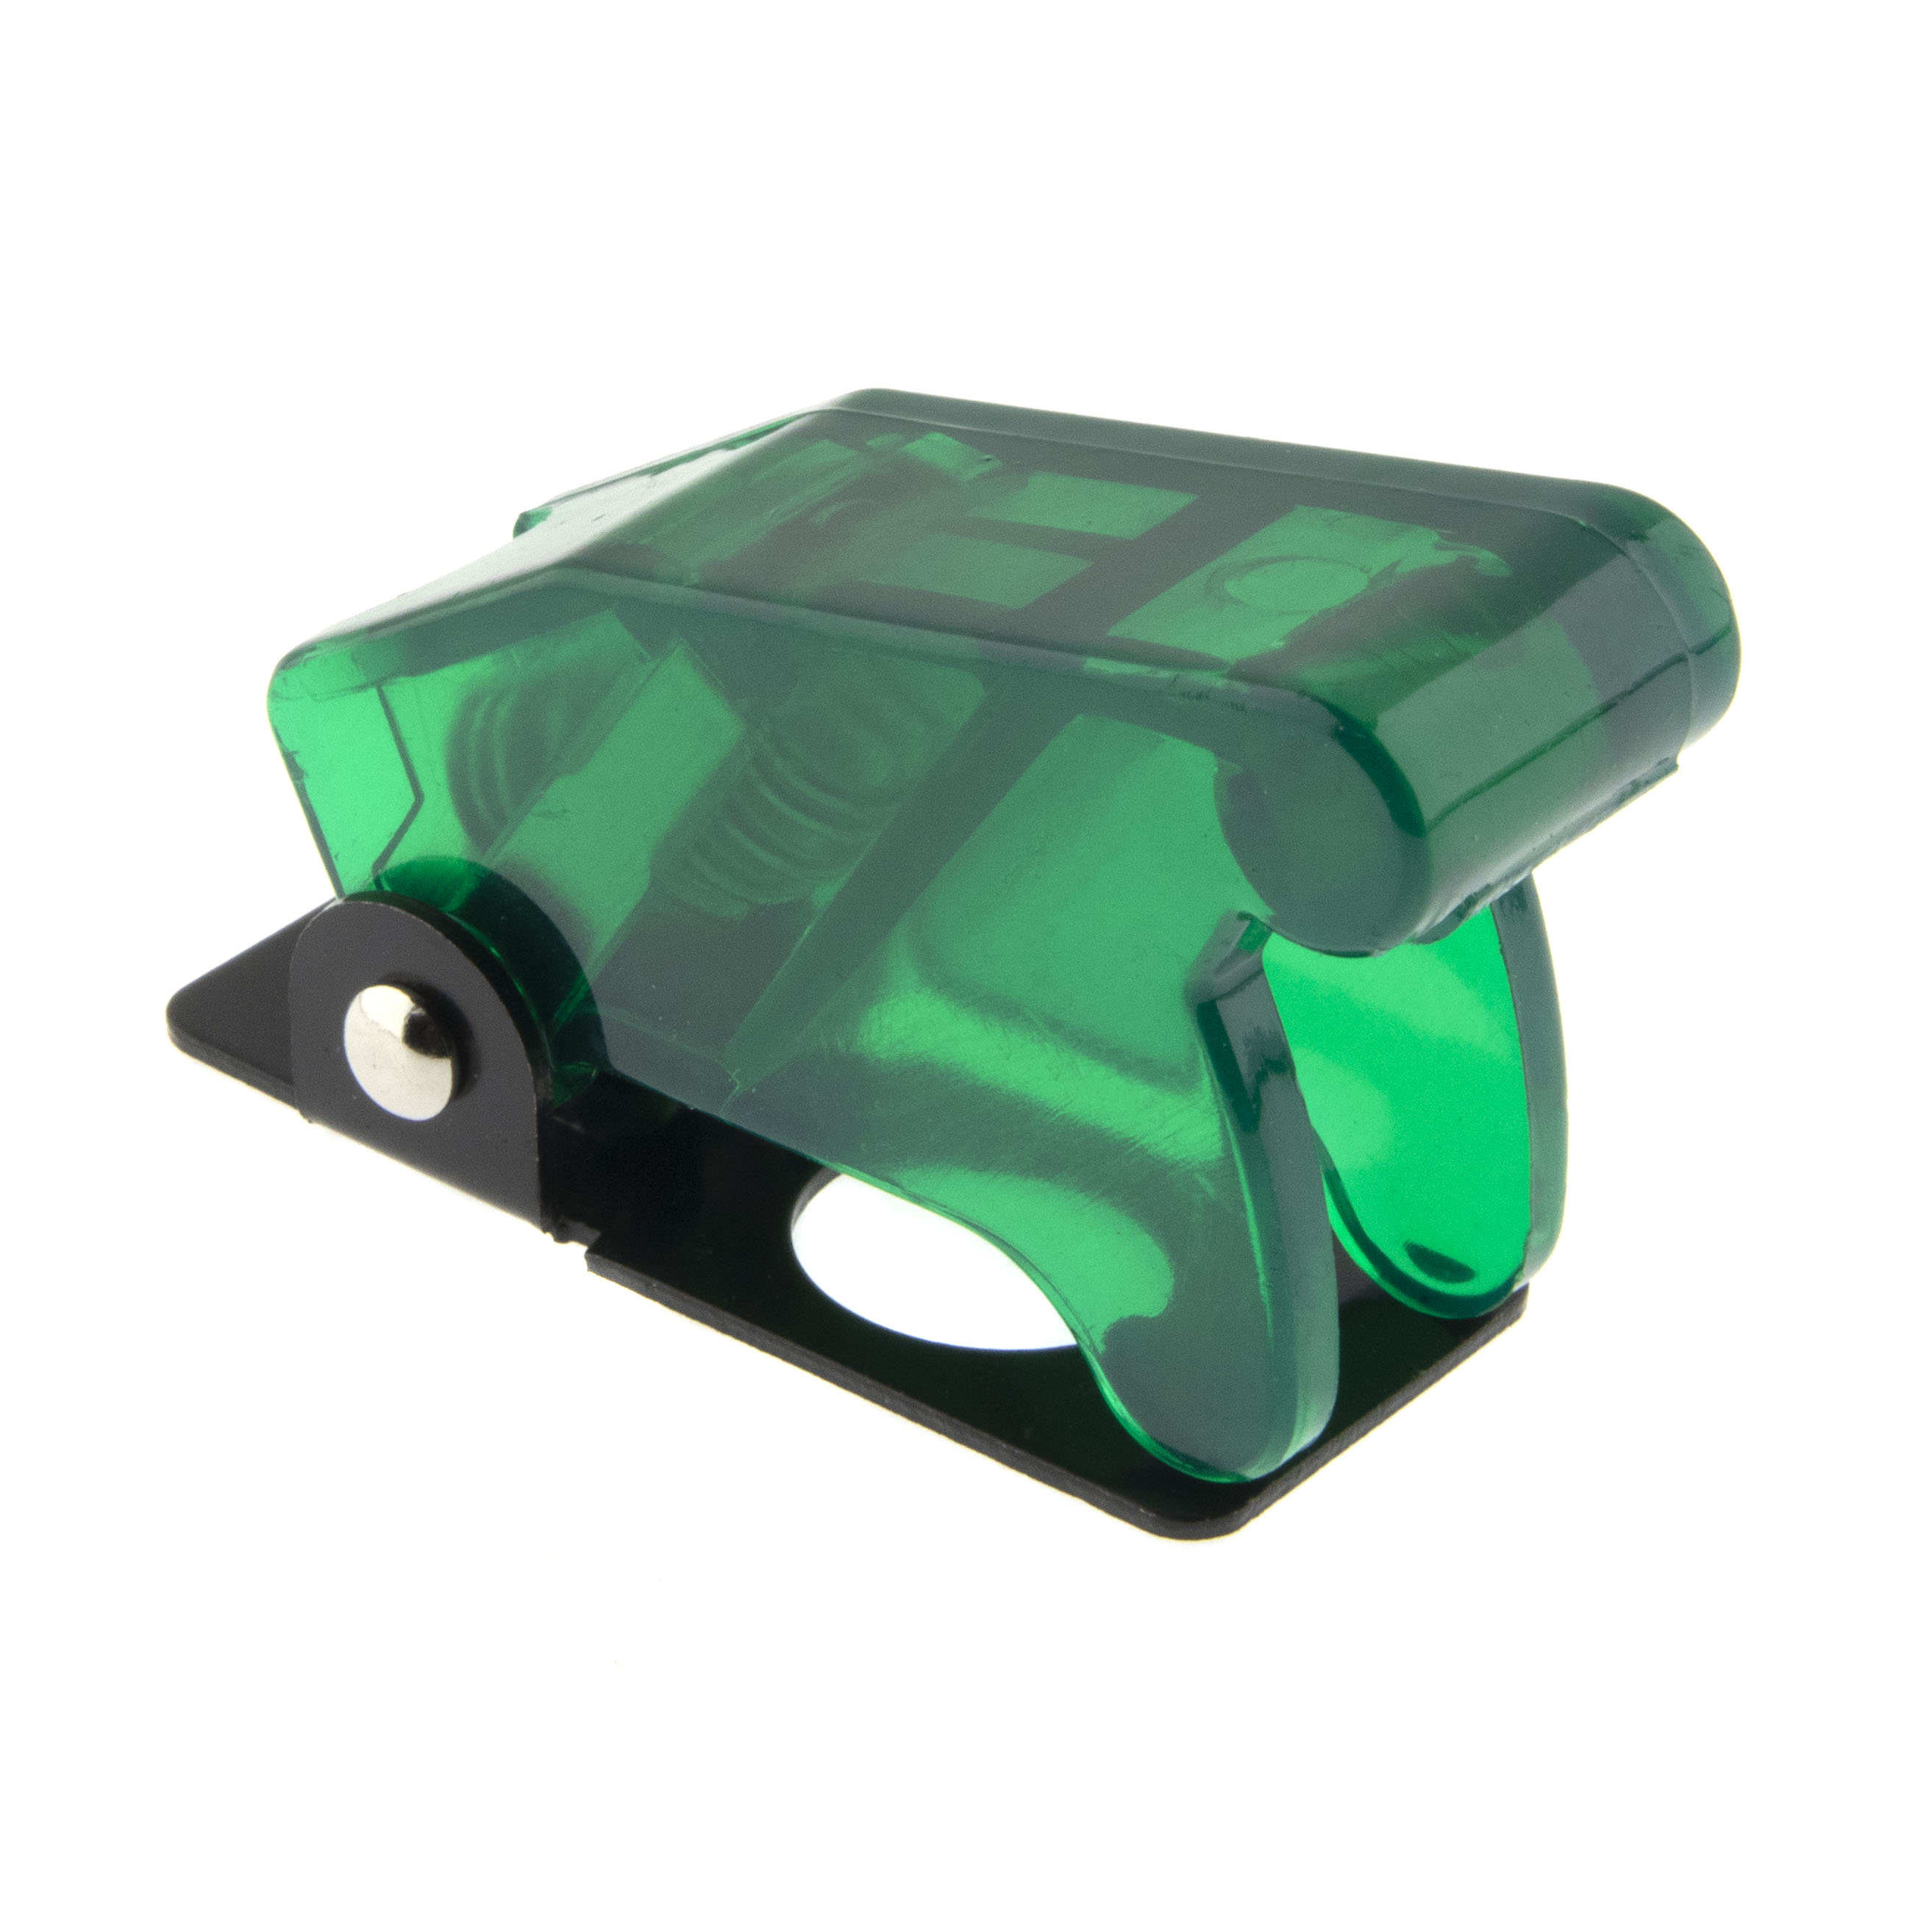 Flip-Cover for toggle switch -green transparent